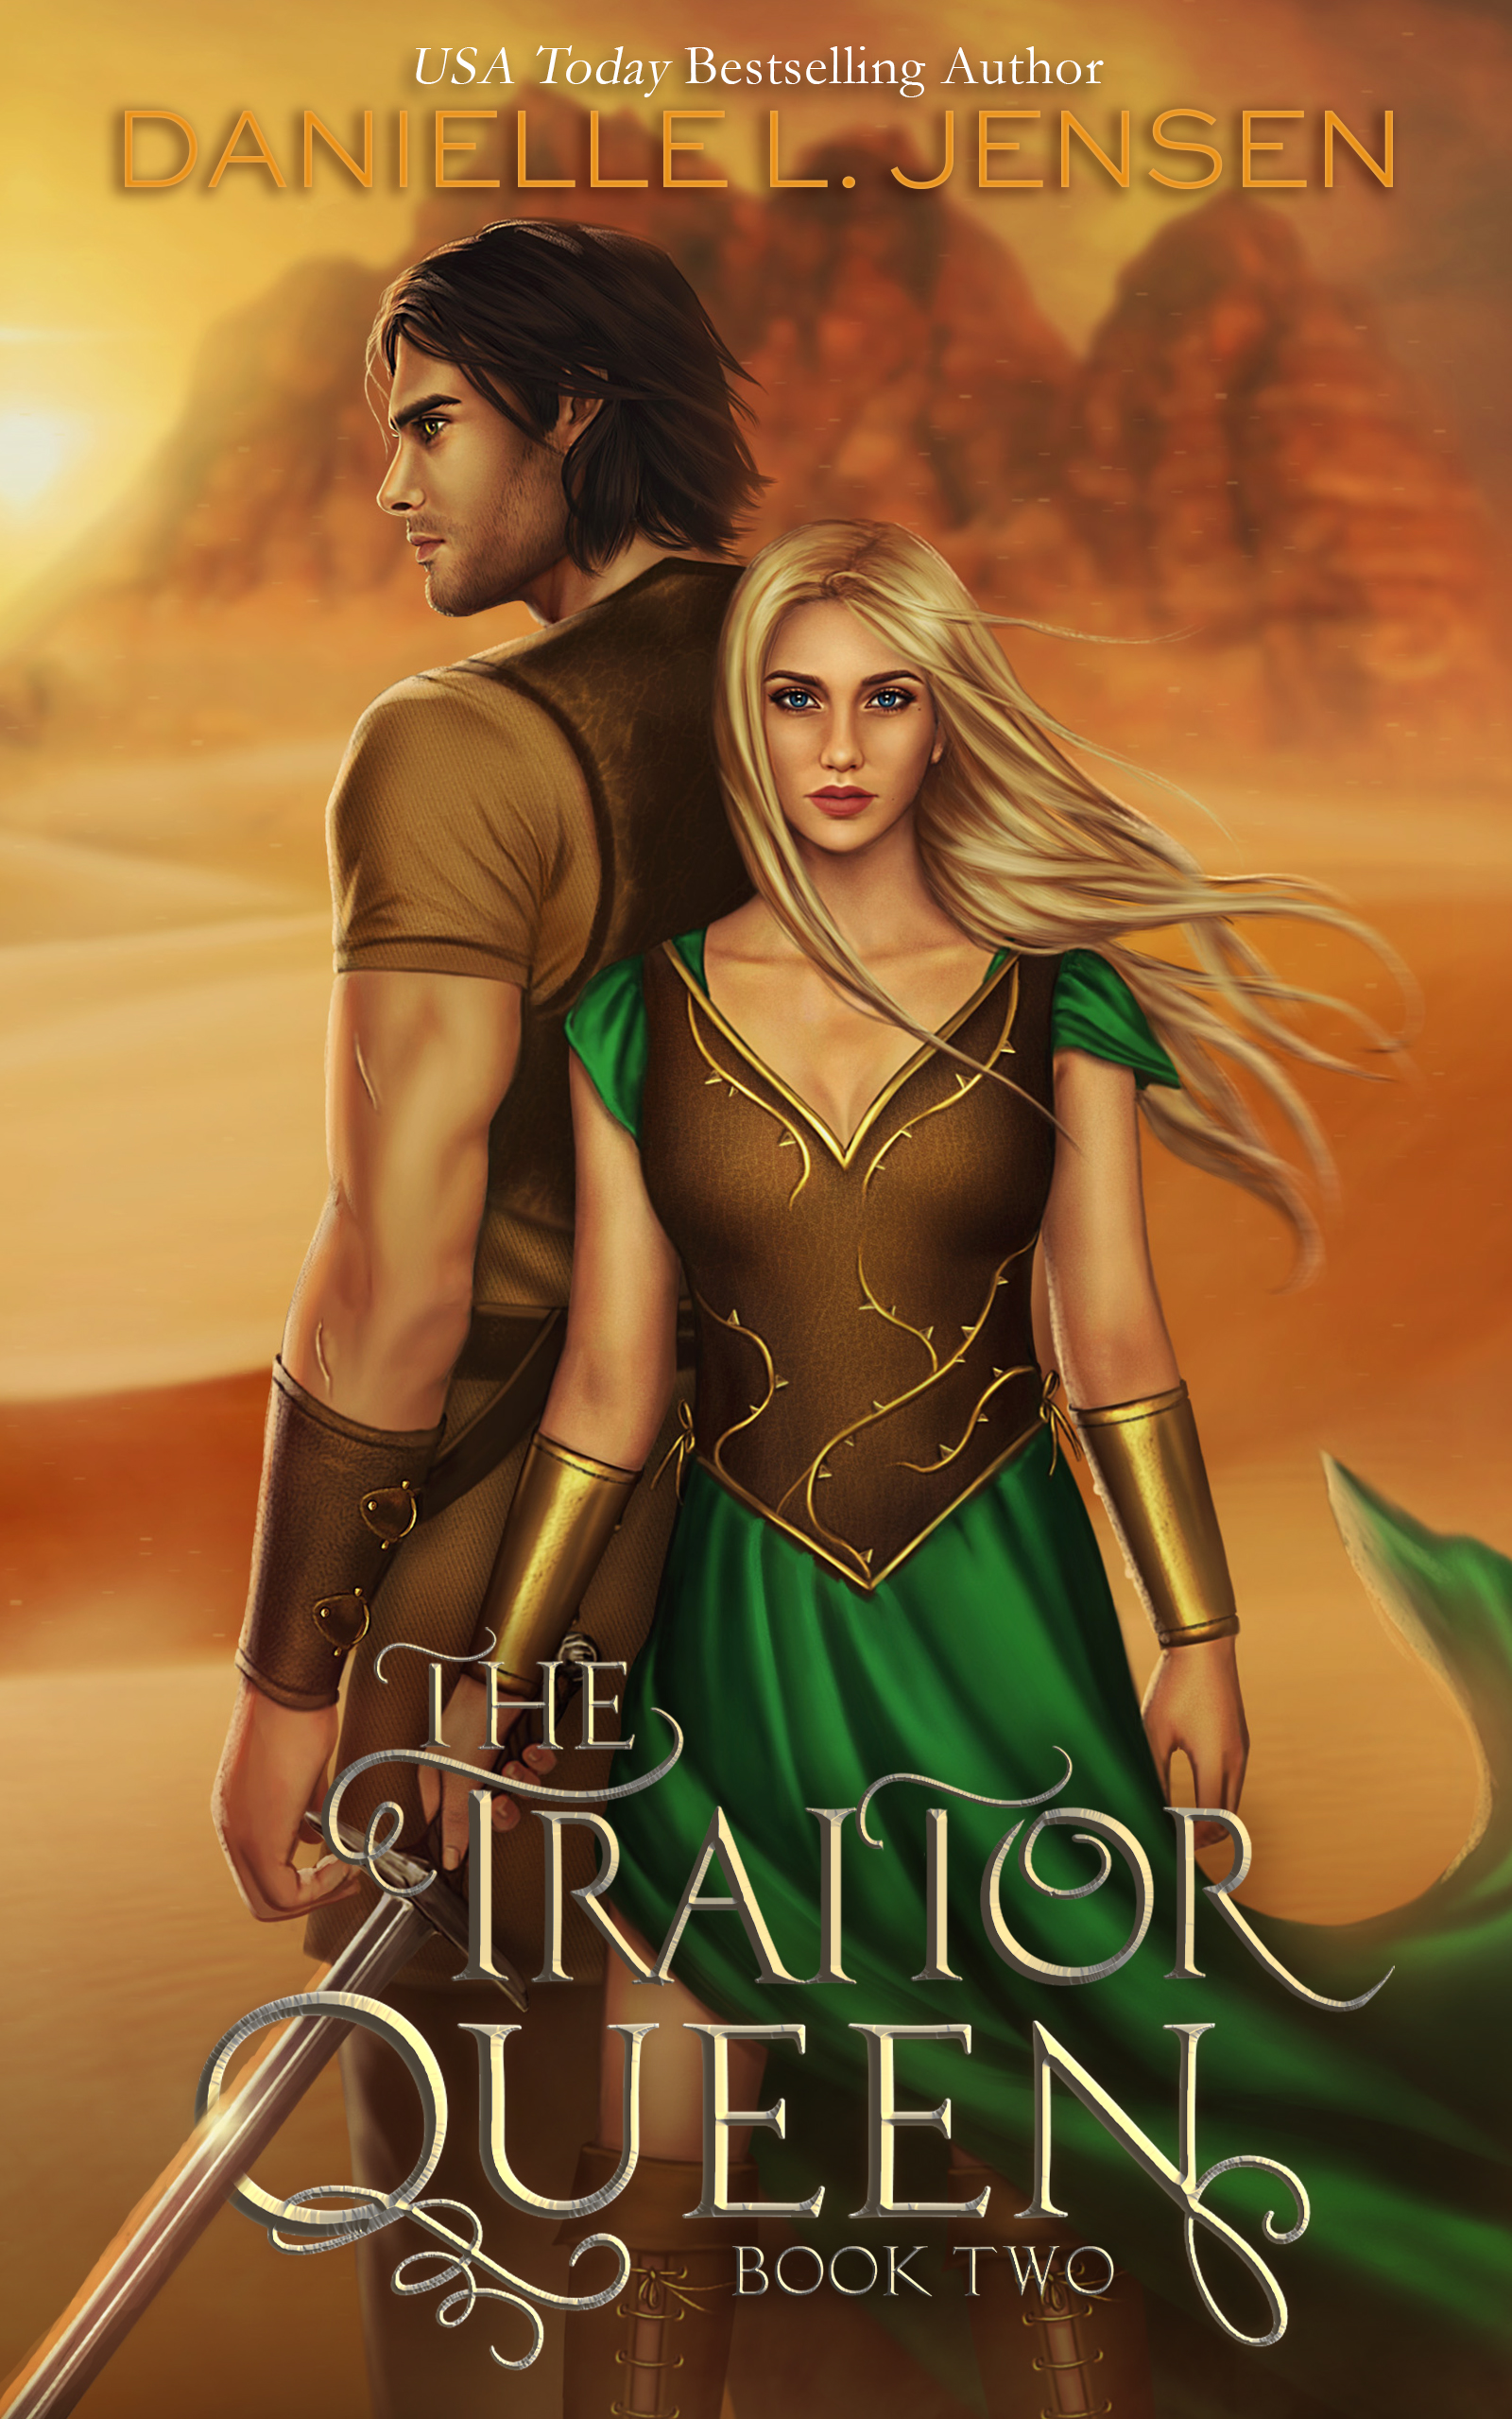 The Traitor Queen by Danielle L. Jensen Download